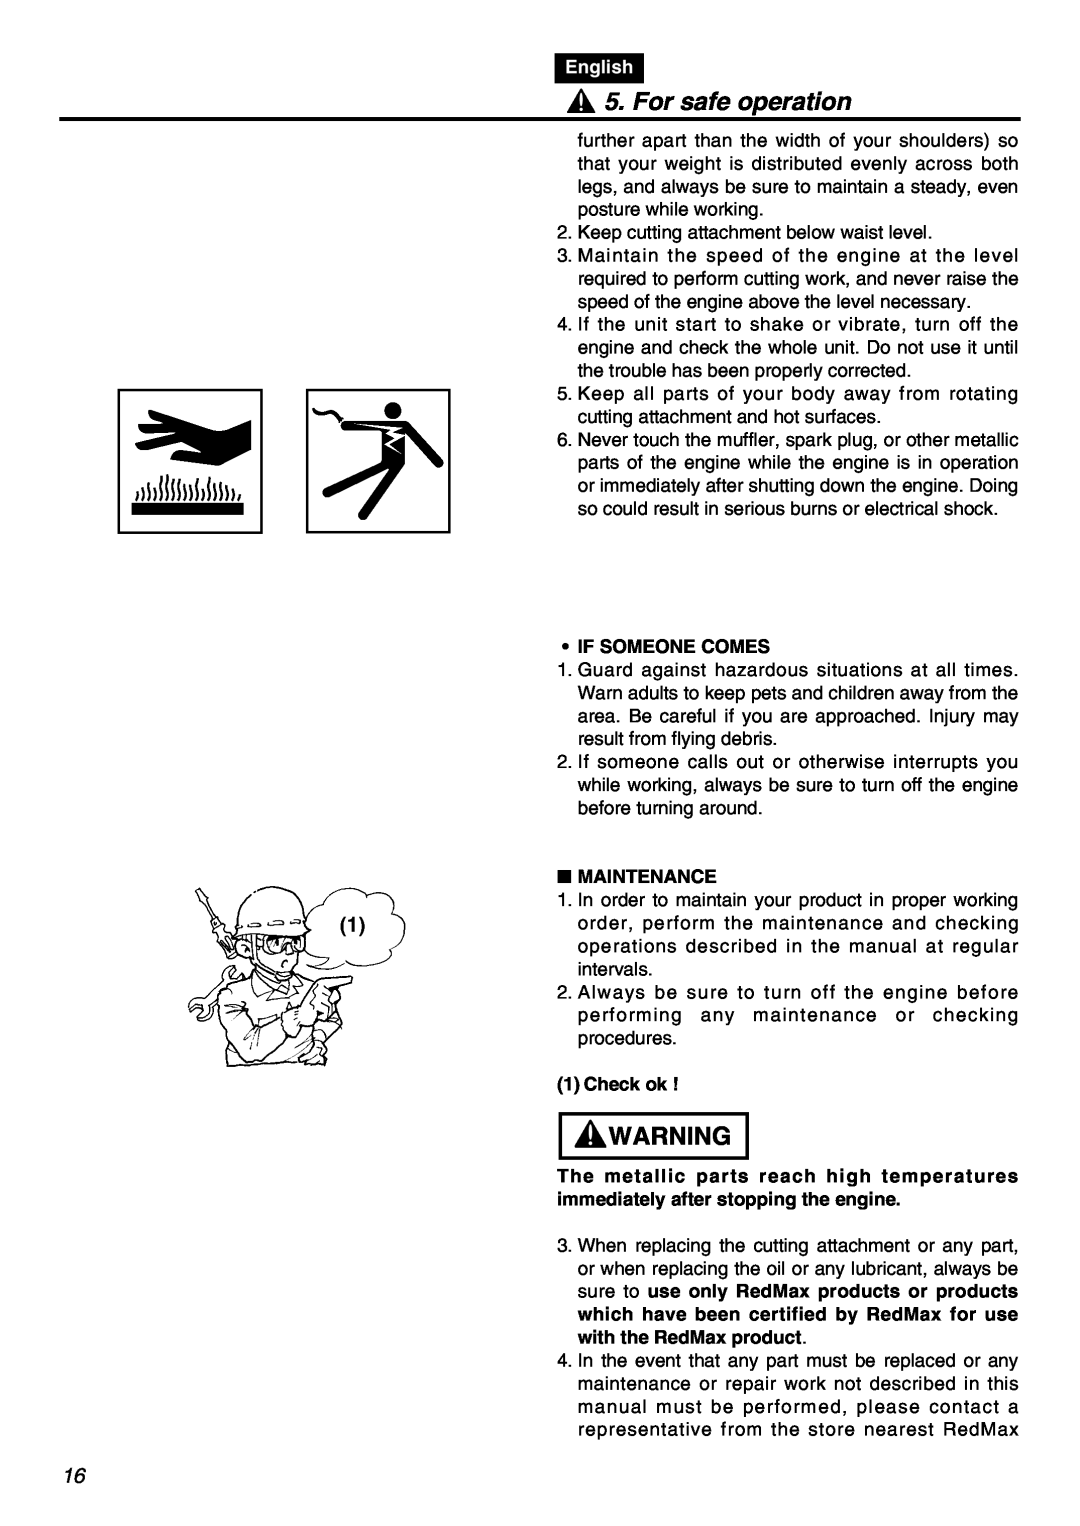 RedMax SRTZ2401F manual For safe operation, English, If Someone Comes, Maintenance, Check ok 